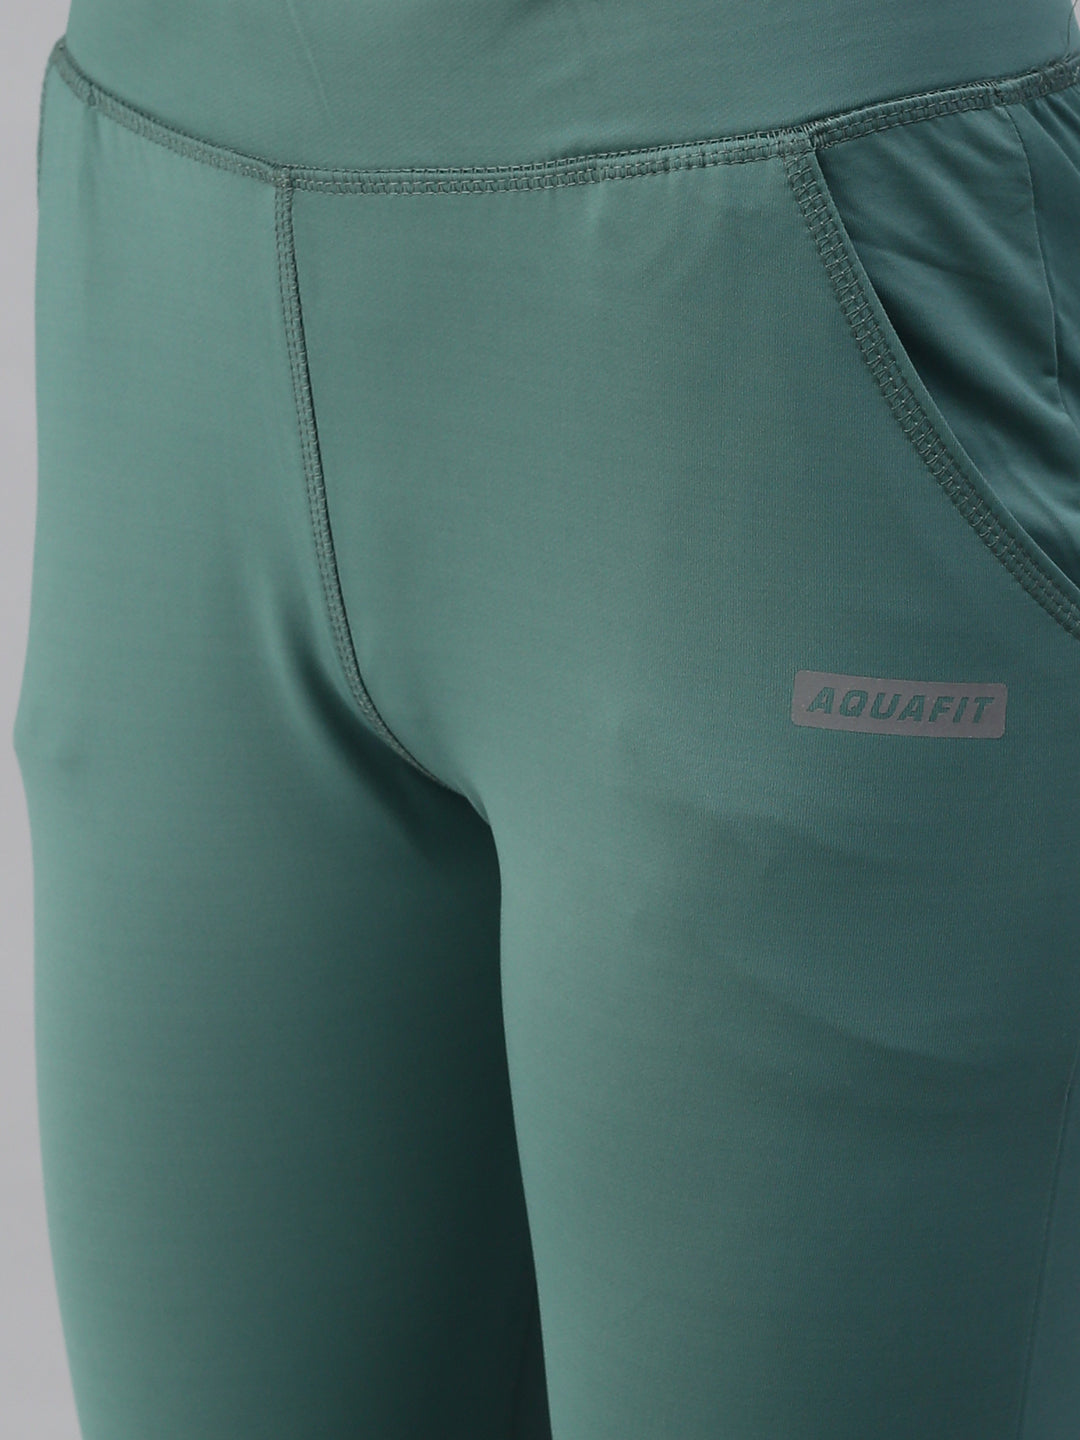 Women's Green Solid Track Pants